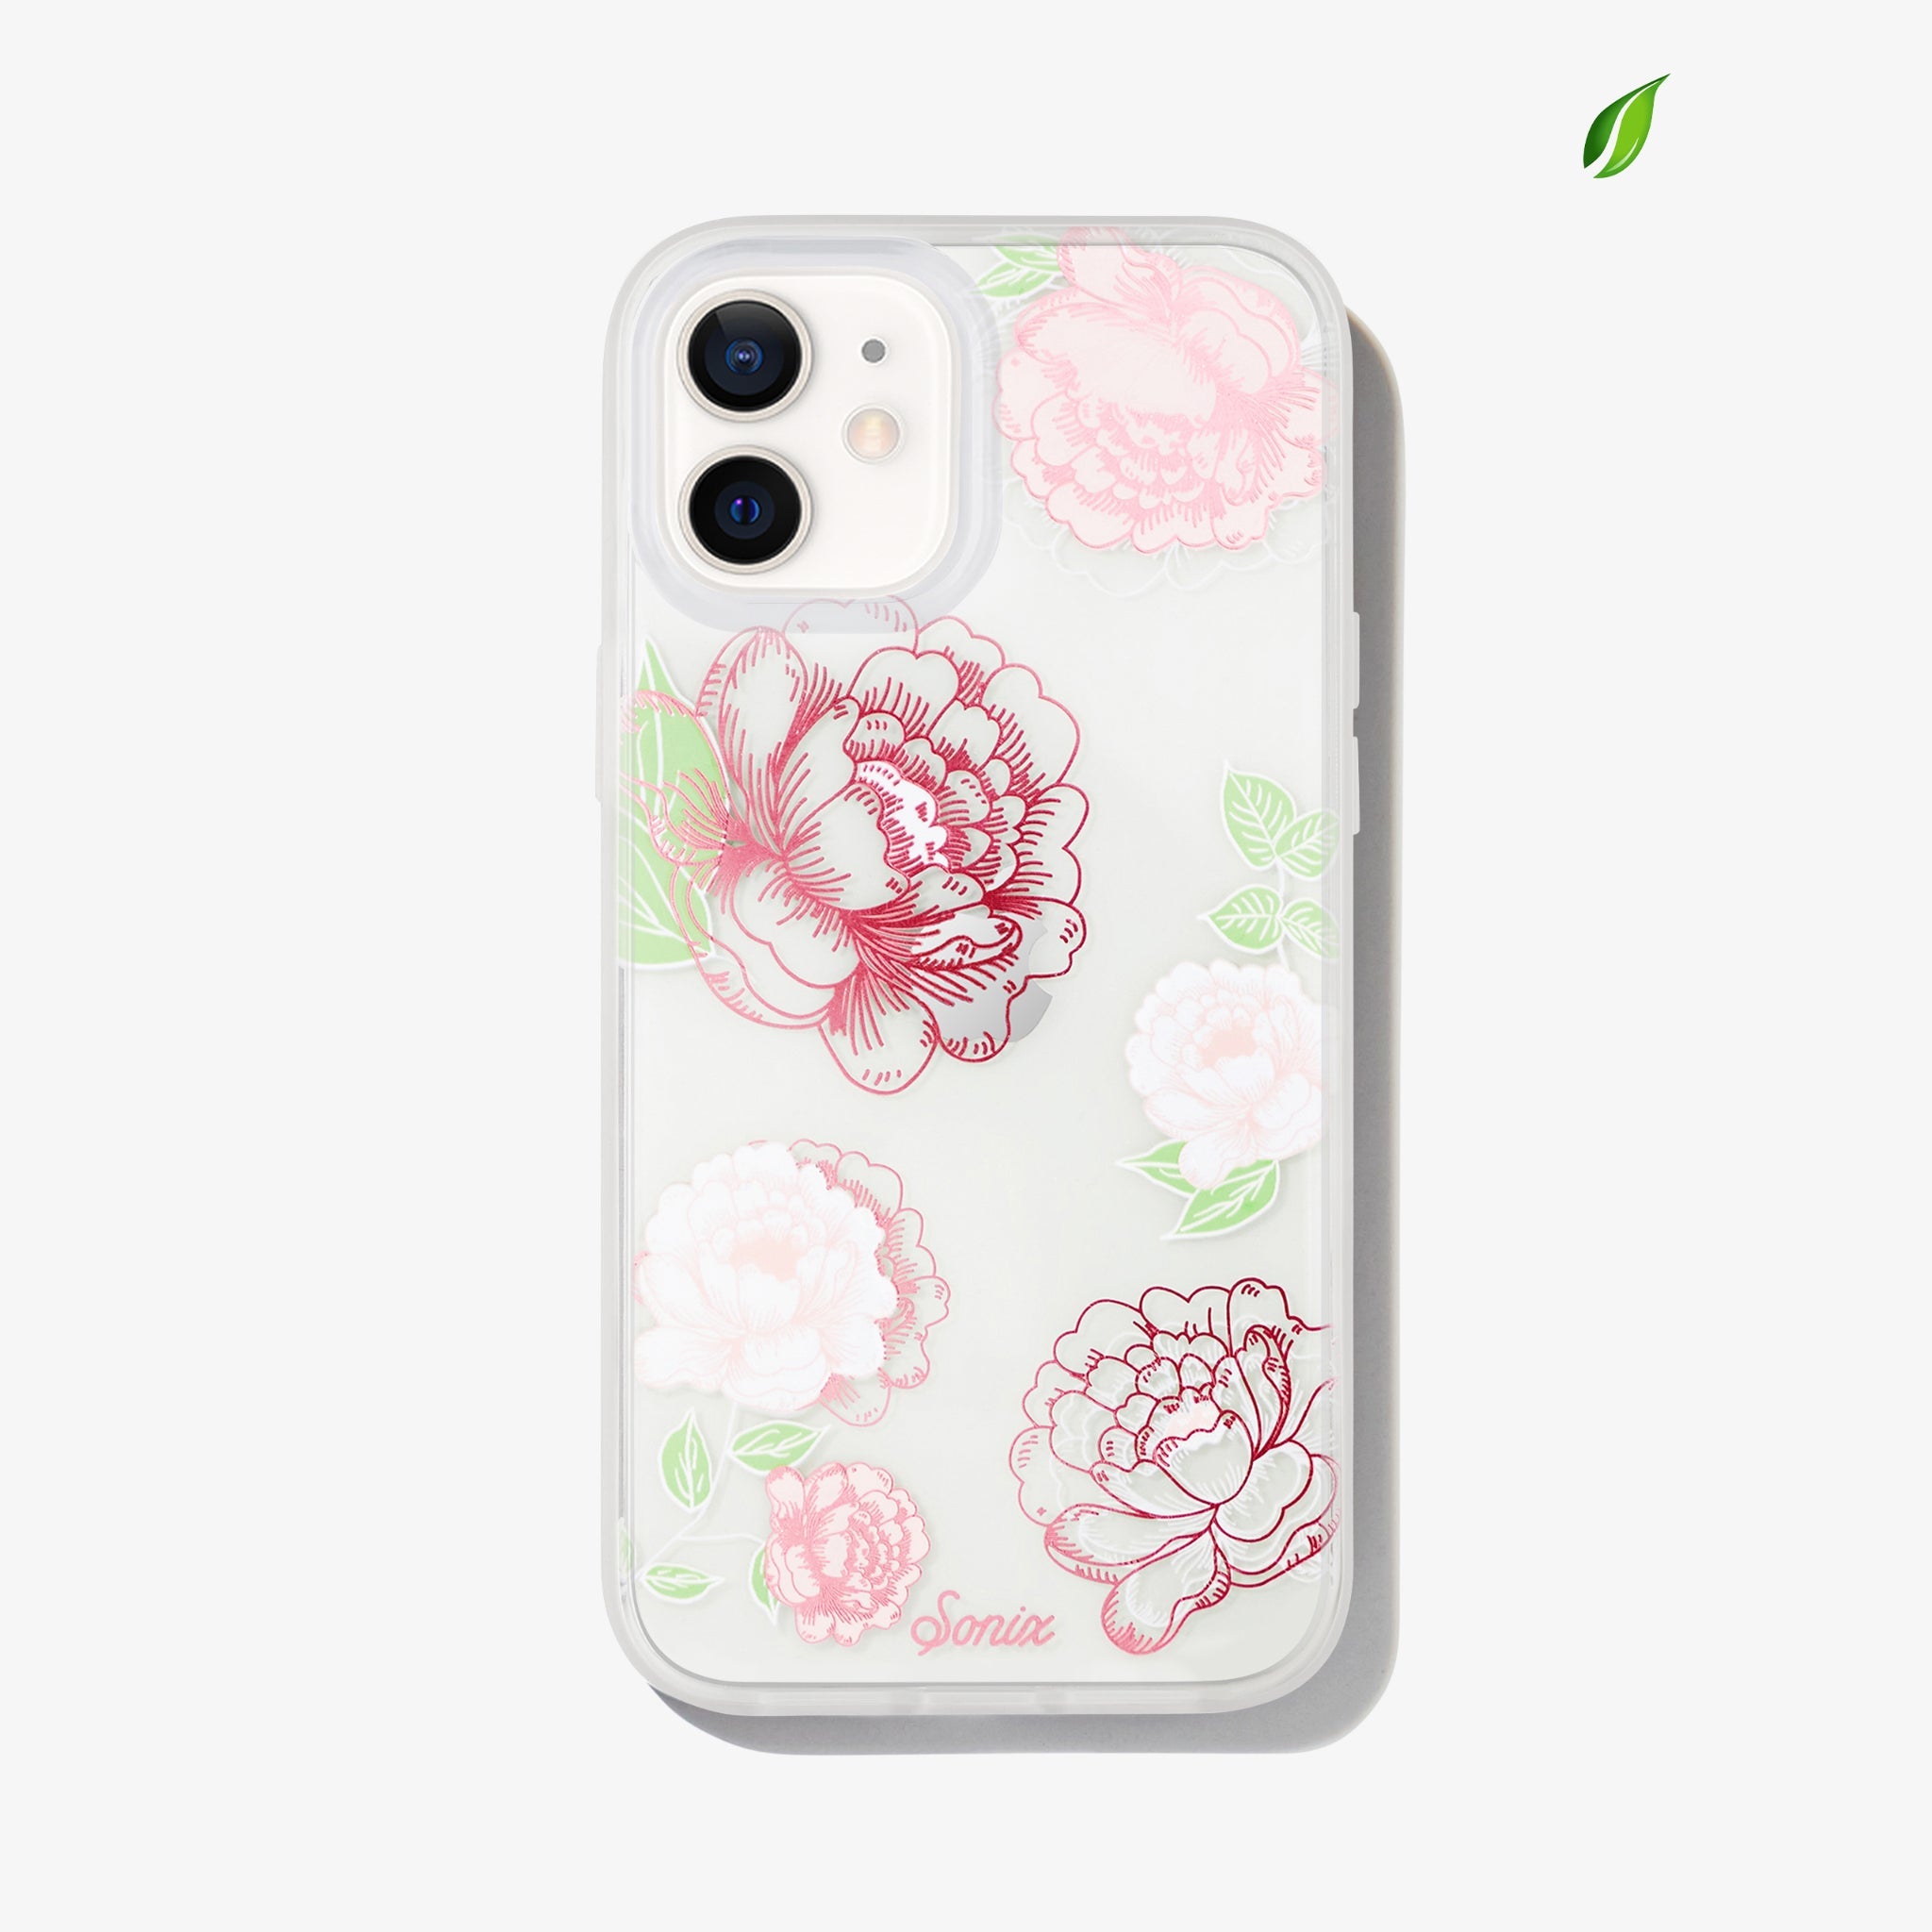 delicate pink and white roses, finished with pink foiling shown on an iphone 12